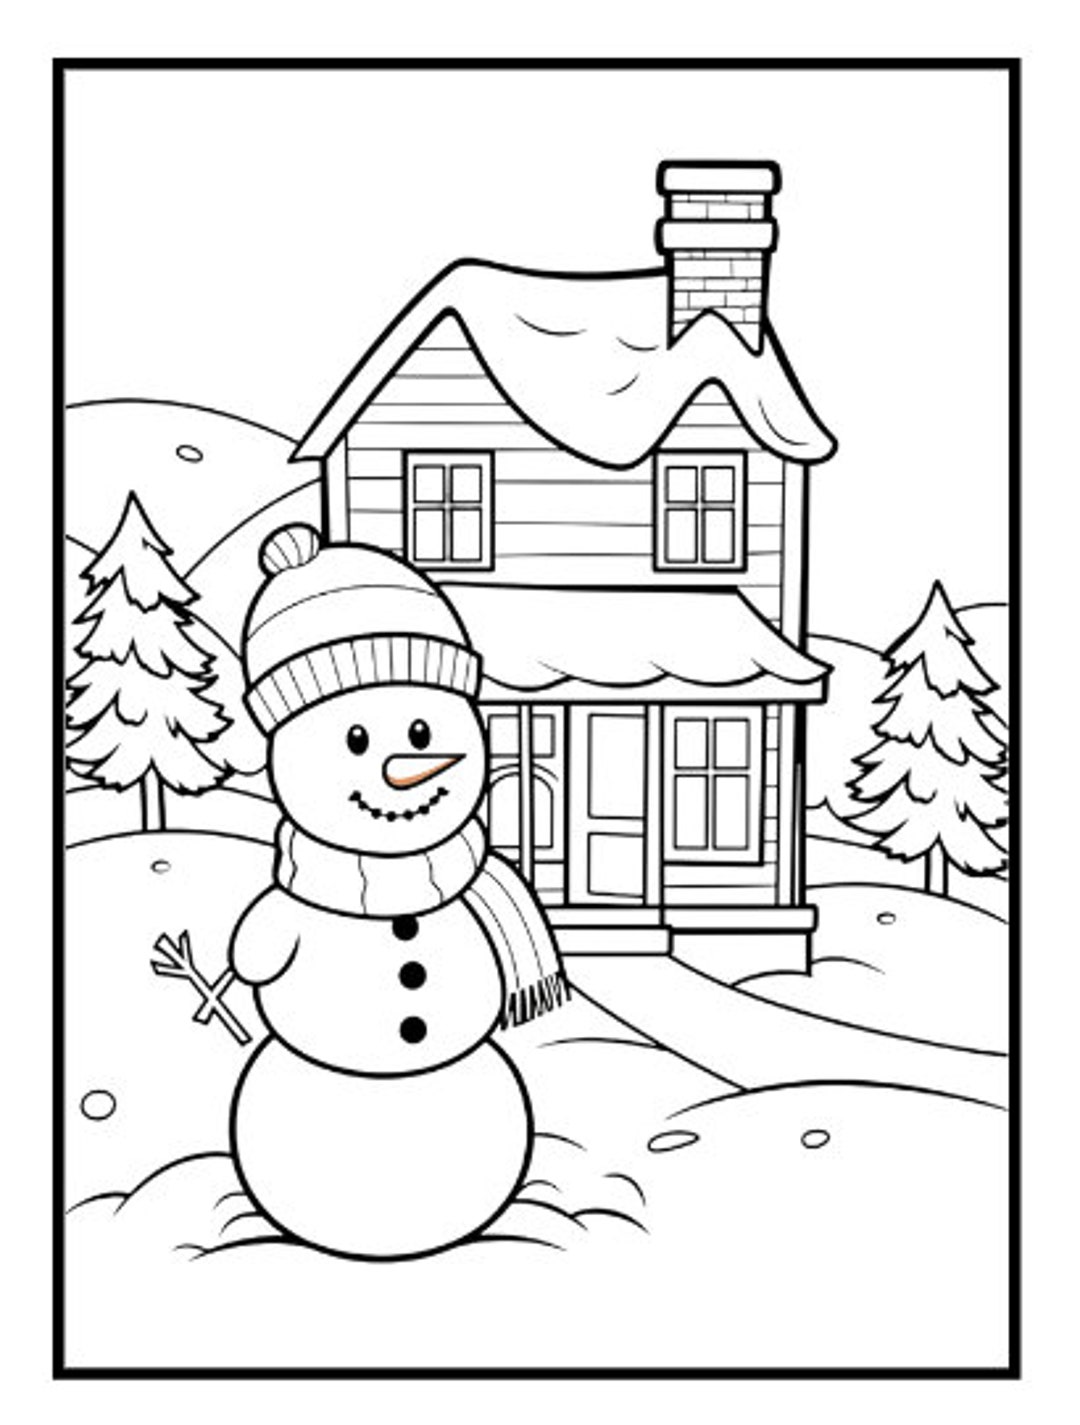 24-print Children's Christmas Coloring Book - Etsy